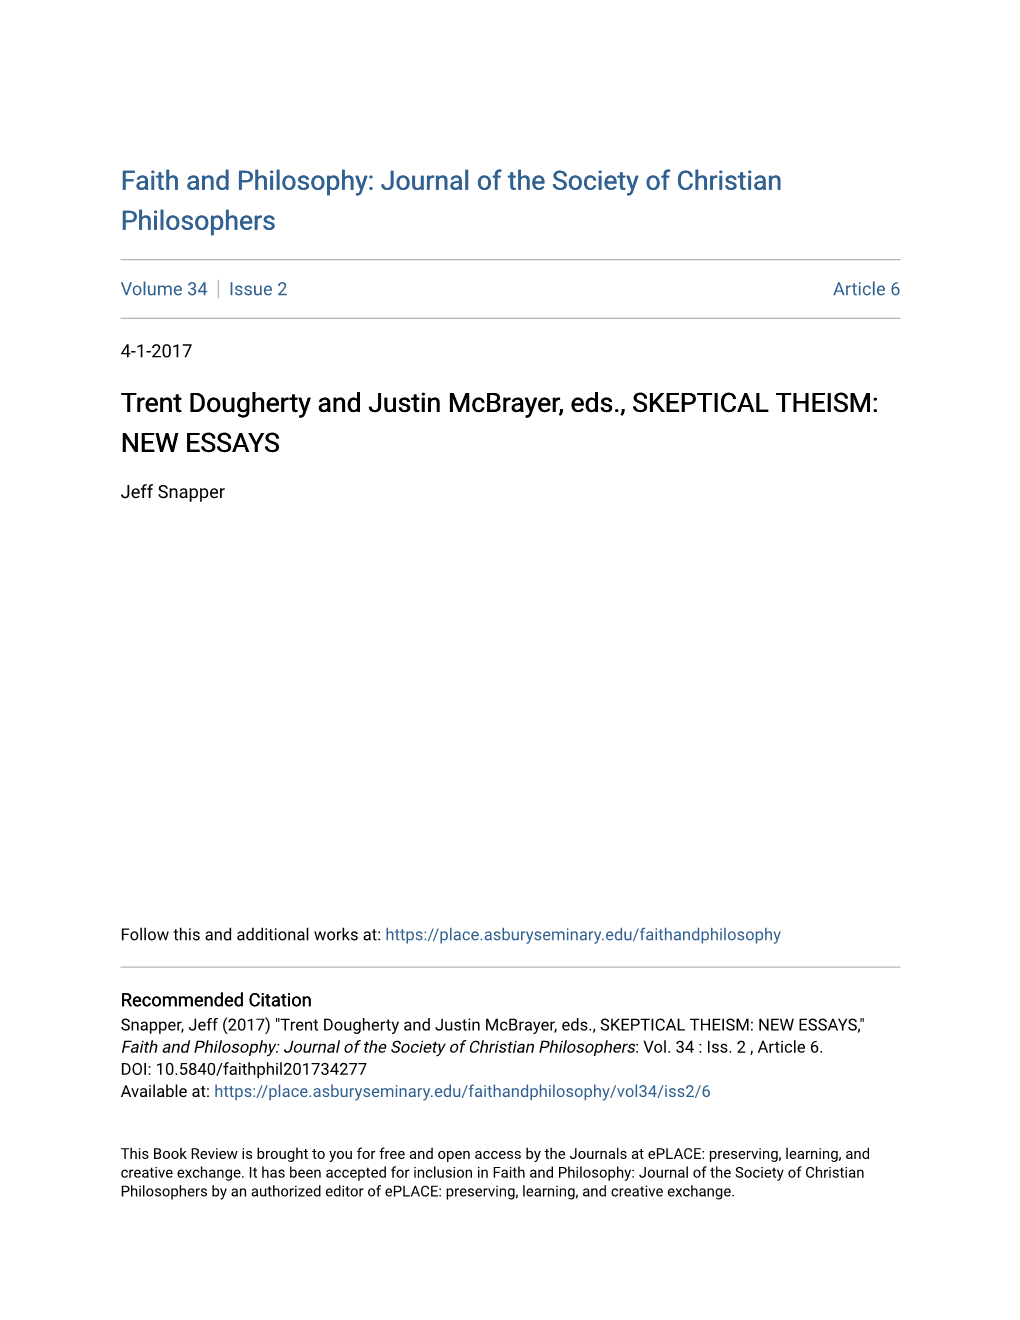 Trent Dougherty and Justin Mcbrayer, Eds., SKEPTICAL THEISM: NEW ESSAYS